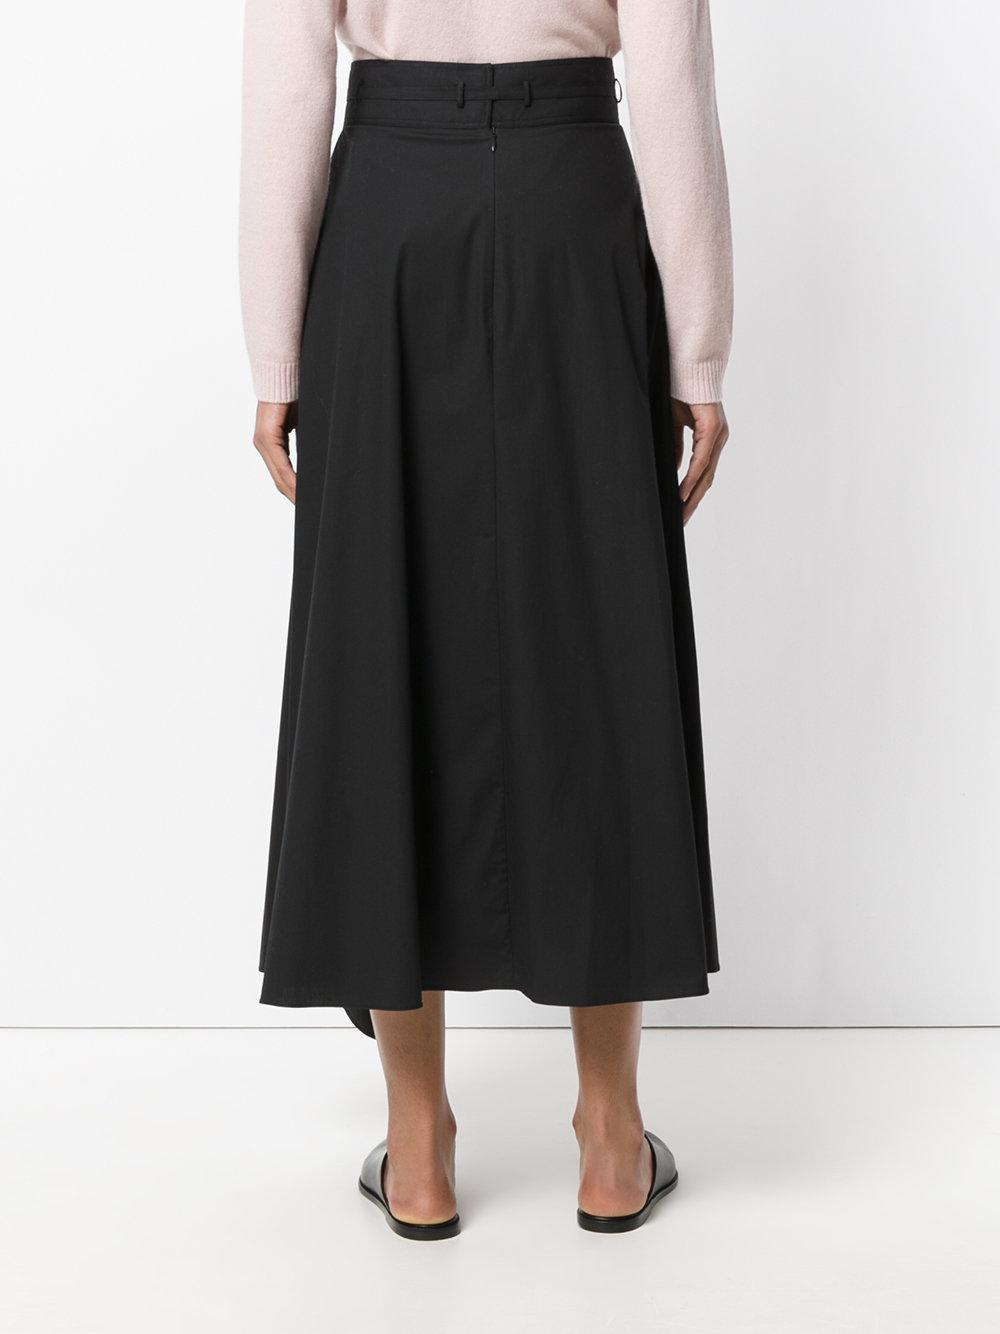 Theory Pleated Skirt in Black - Lyst